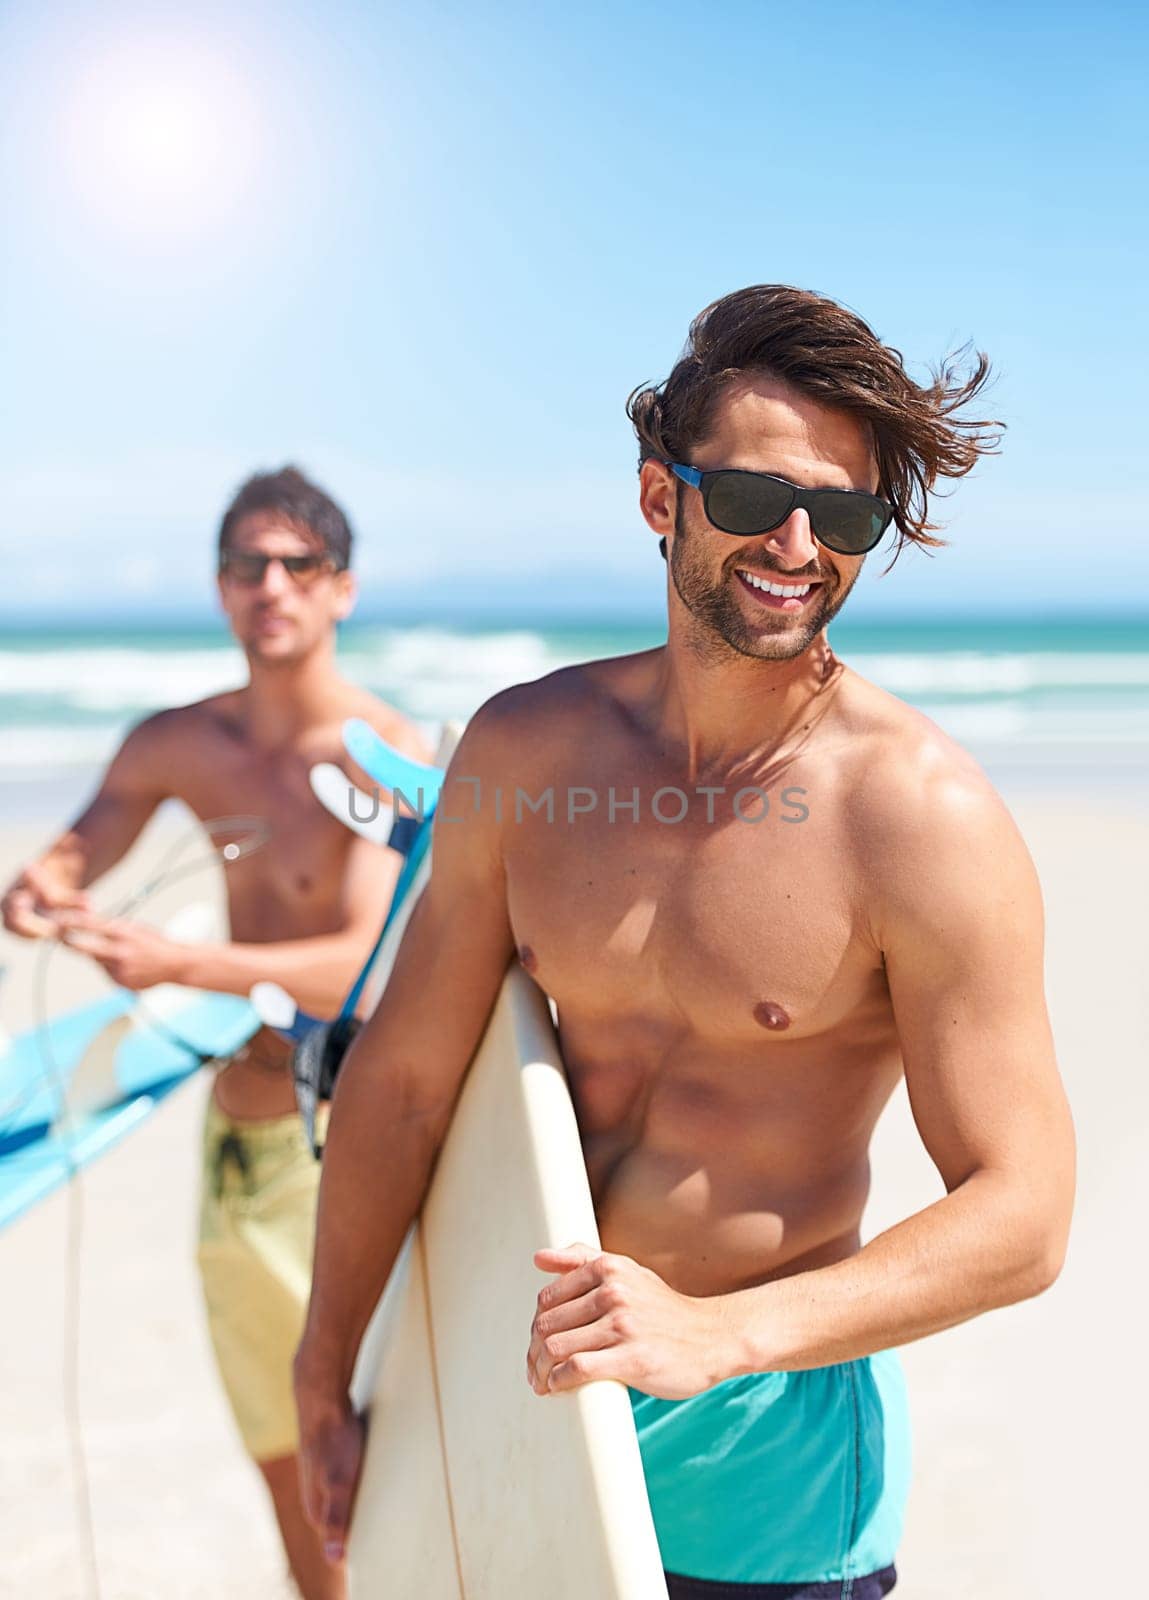 Beach, travel and man surfing friends outdoor together for summer vacation or holiday trip overseas. Surf, sea or fun with a shirtless young male surfer in sunglasses and friend bonding on the coast.